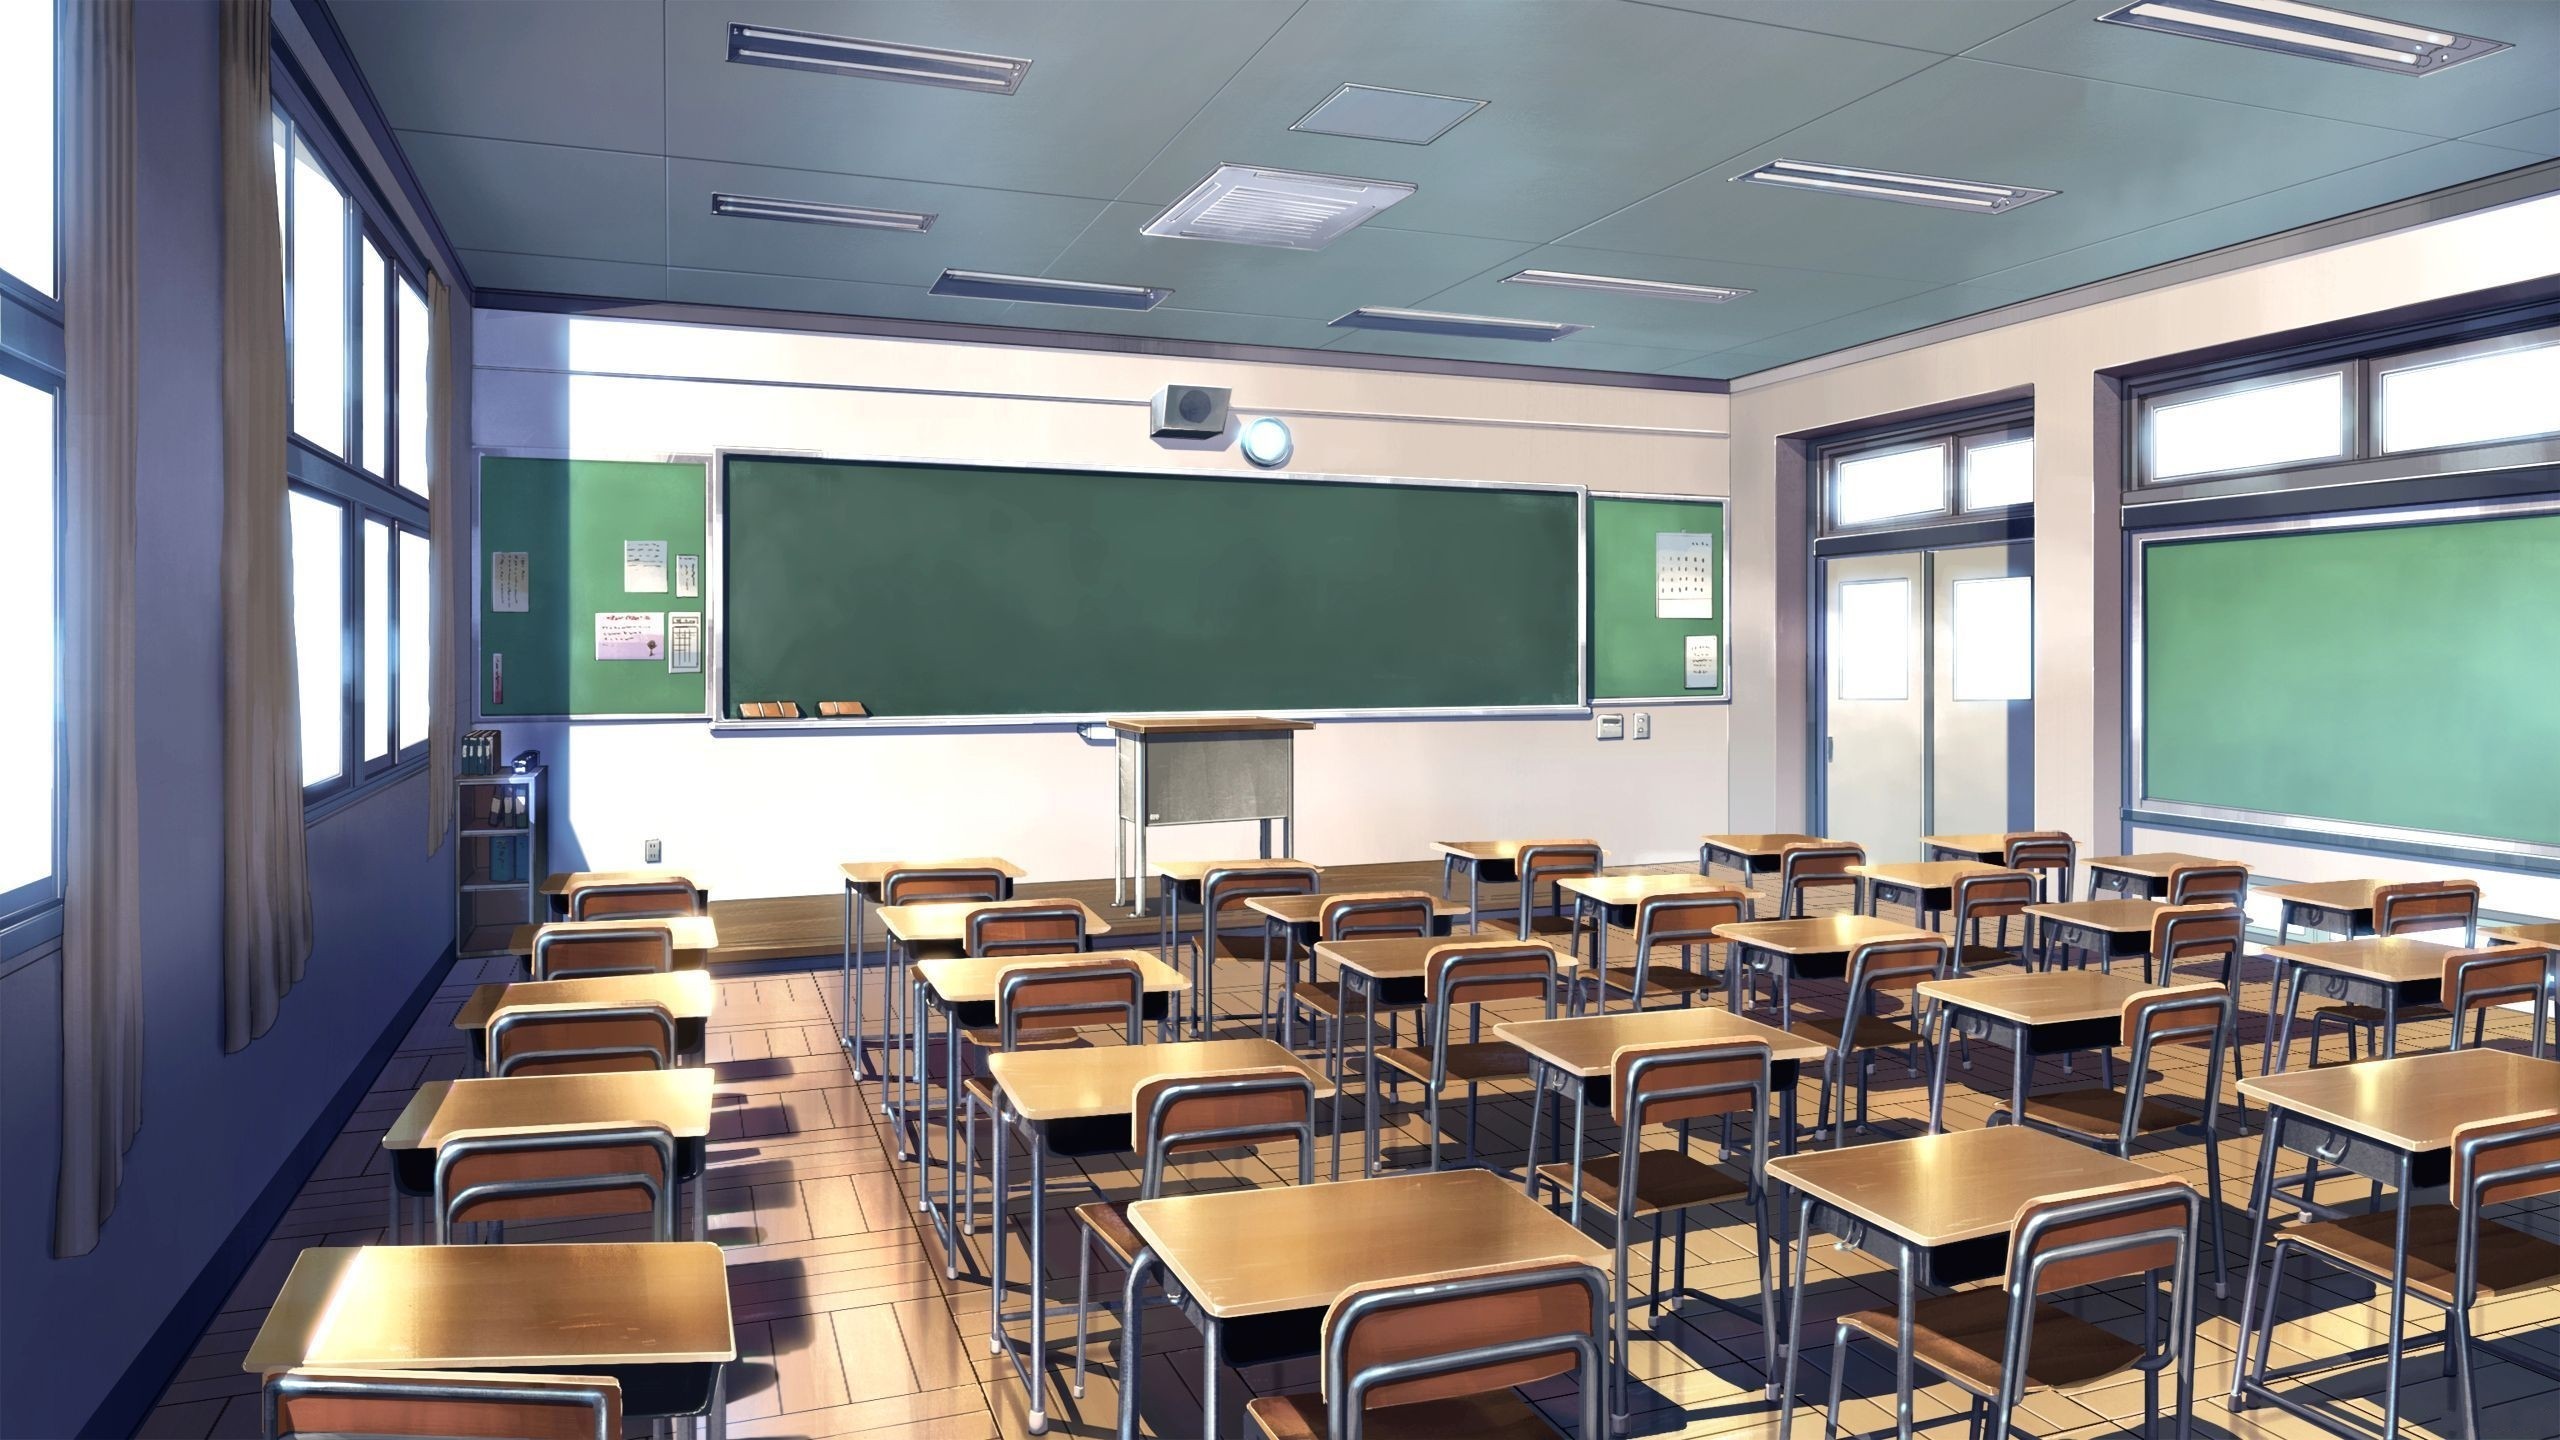  Anime  School  background    Download free cool backgrounds  